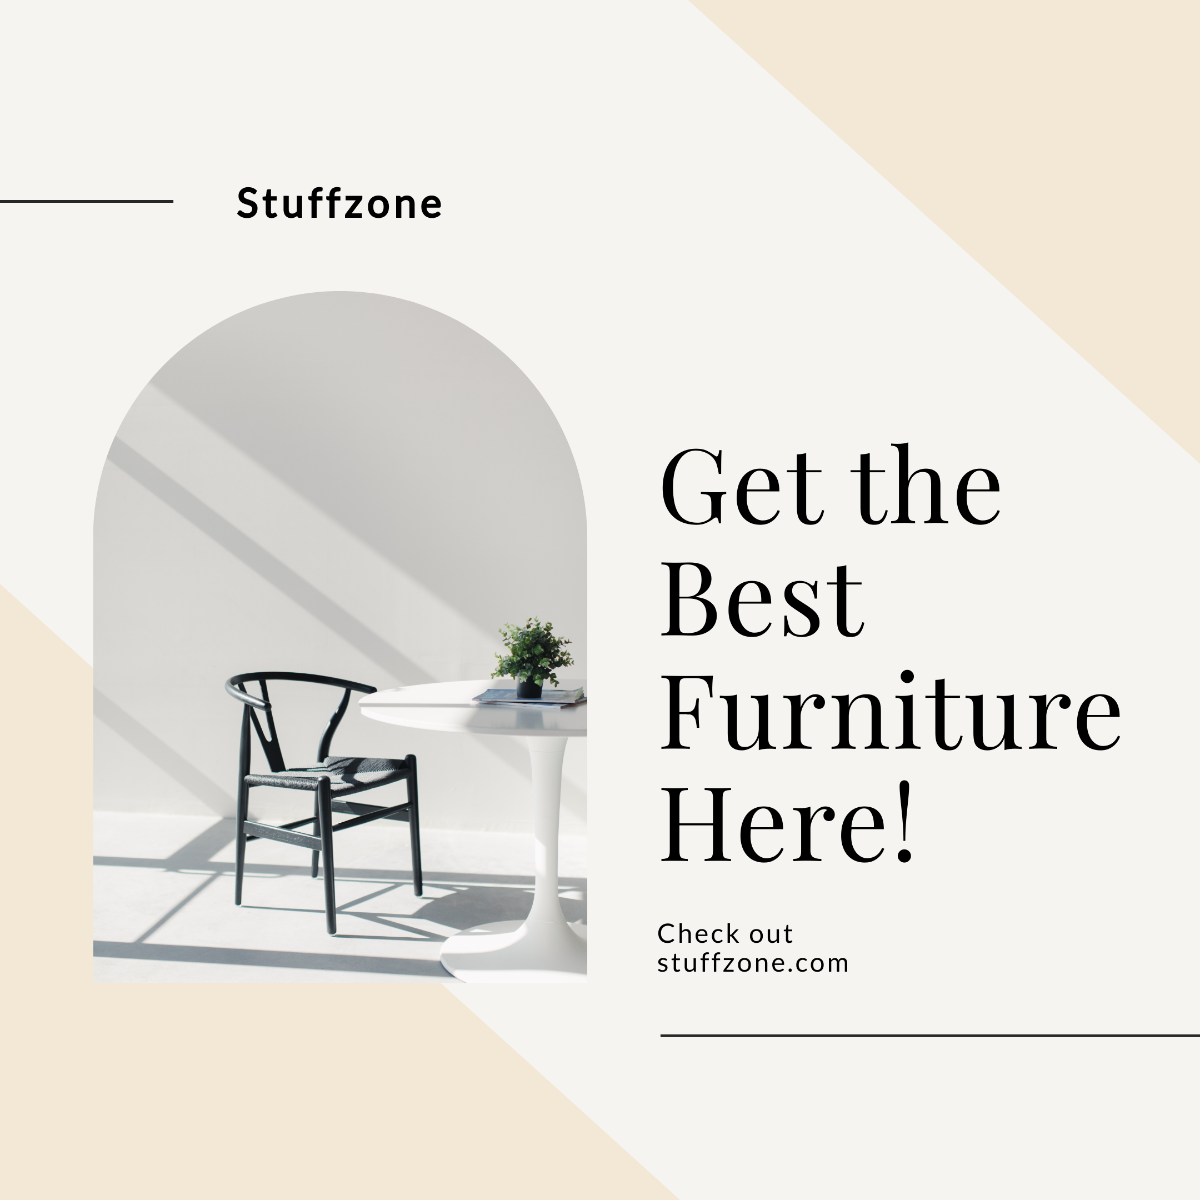 Free Furniture Instagram Feed Ad Template